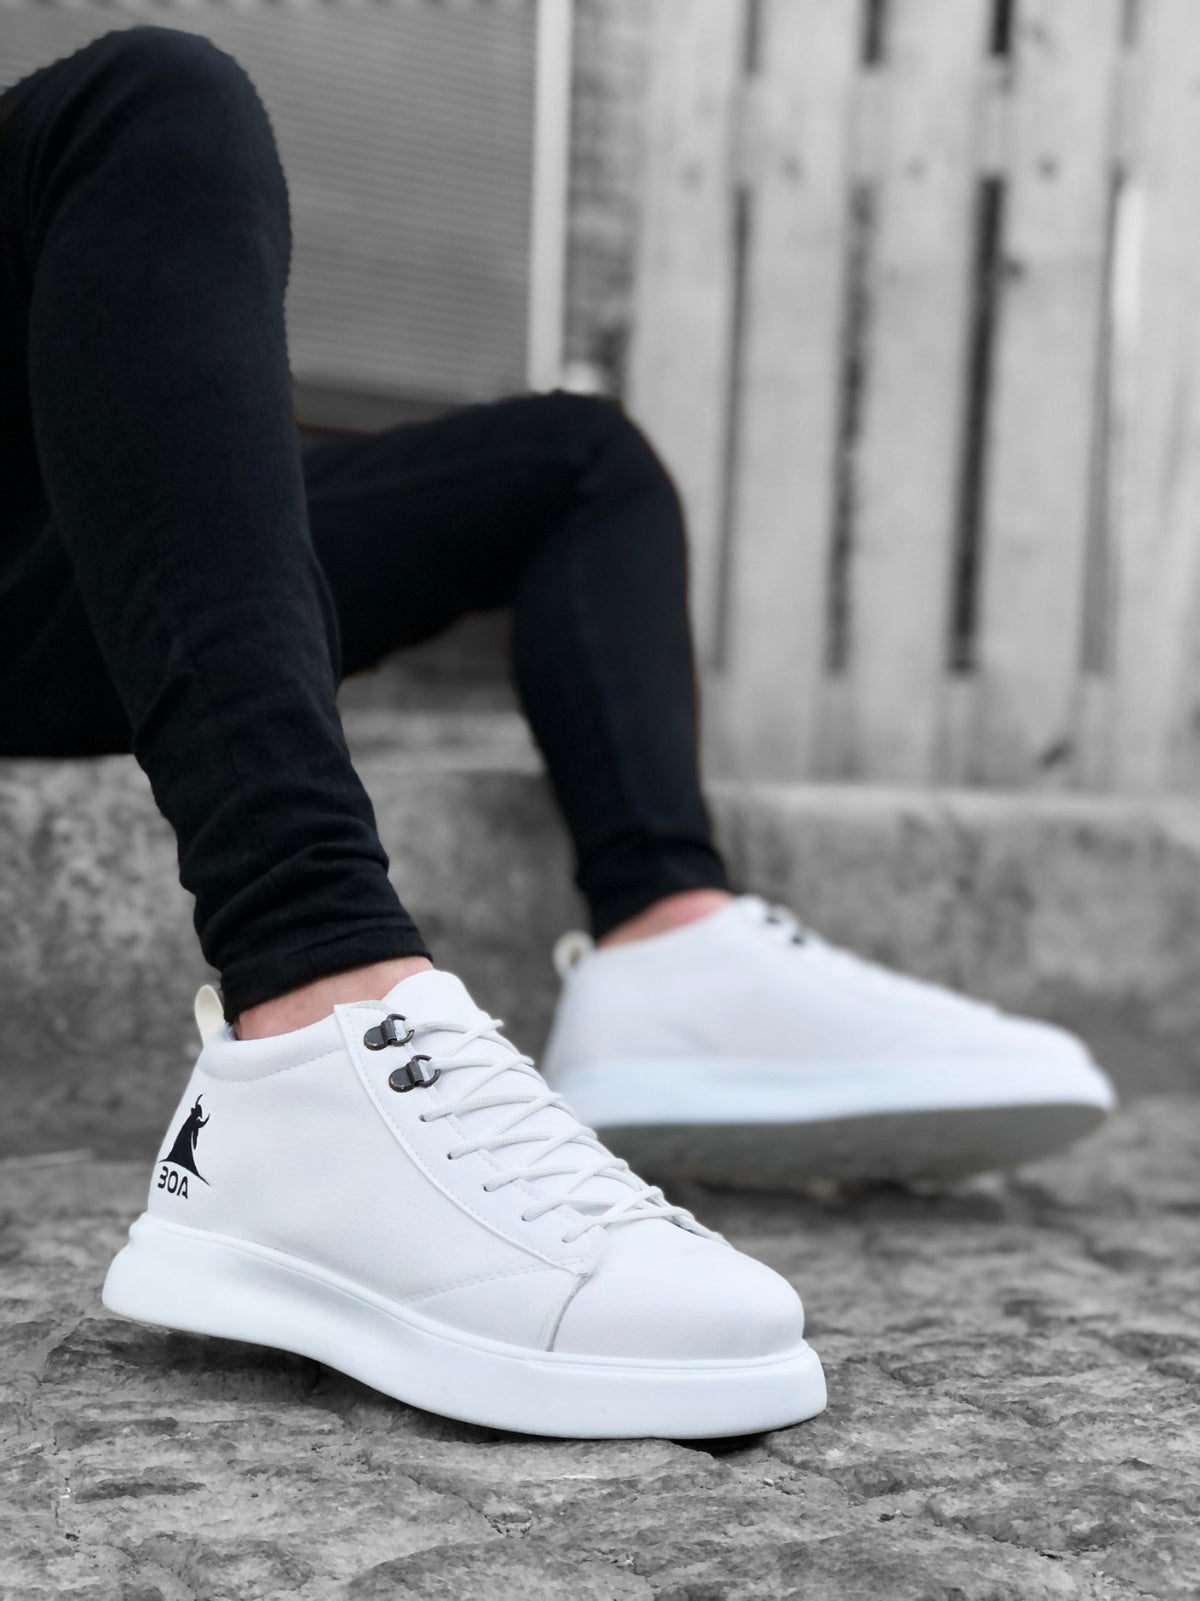 BA0220 Lace-up Men's High Sole White Sole Sports Shoes sneakers - STREETMODE™